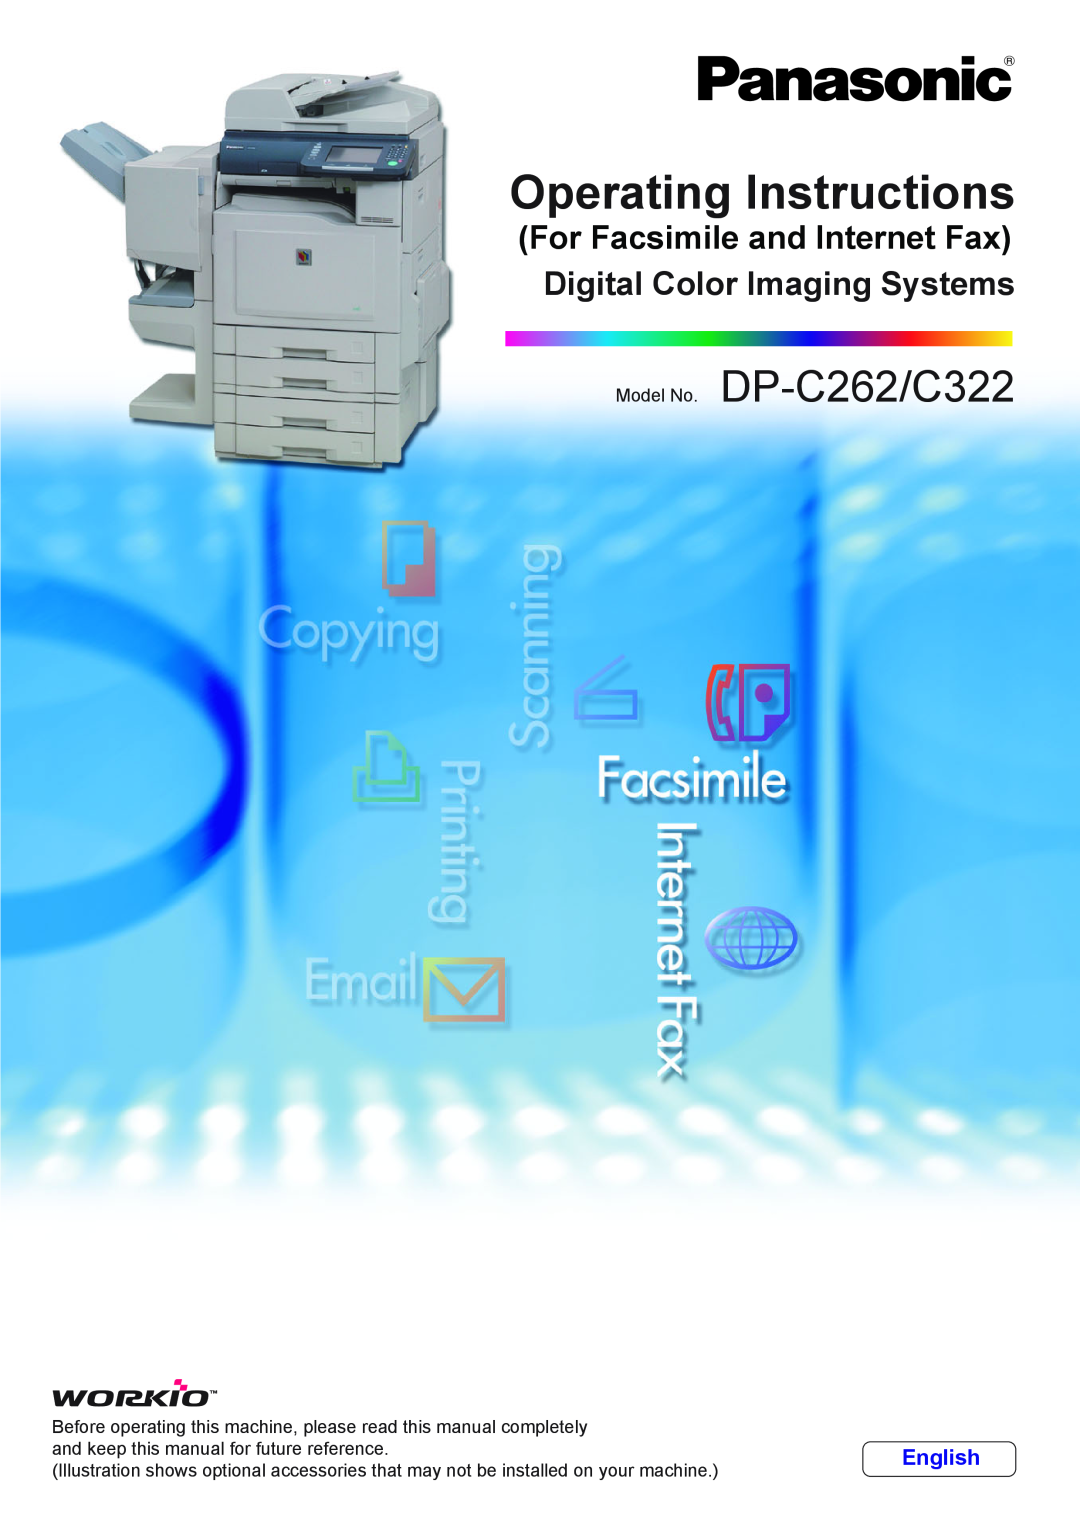 Philips manual Operating Instructions, Model No. DP-C262/C322, For Scanner and Email Digital Color Imaging Systems 